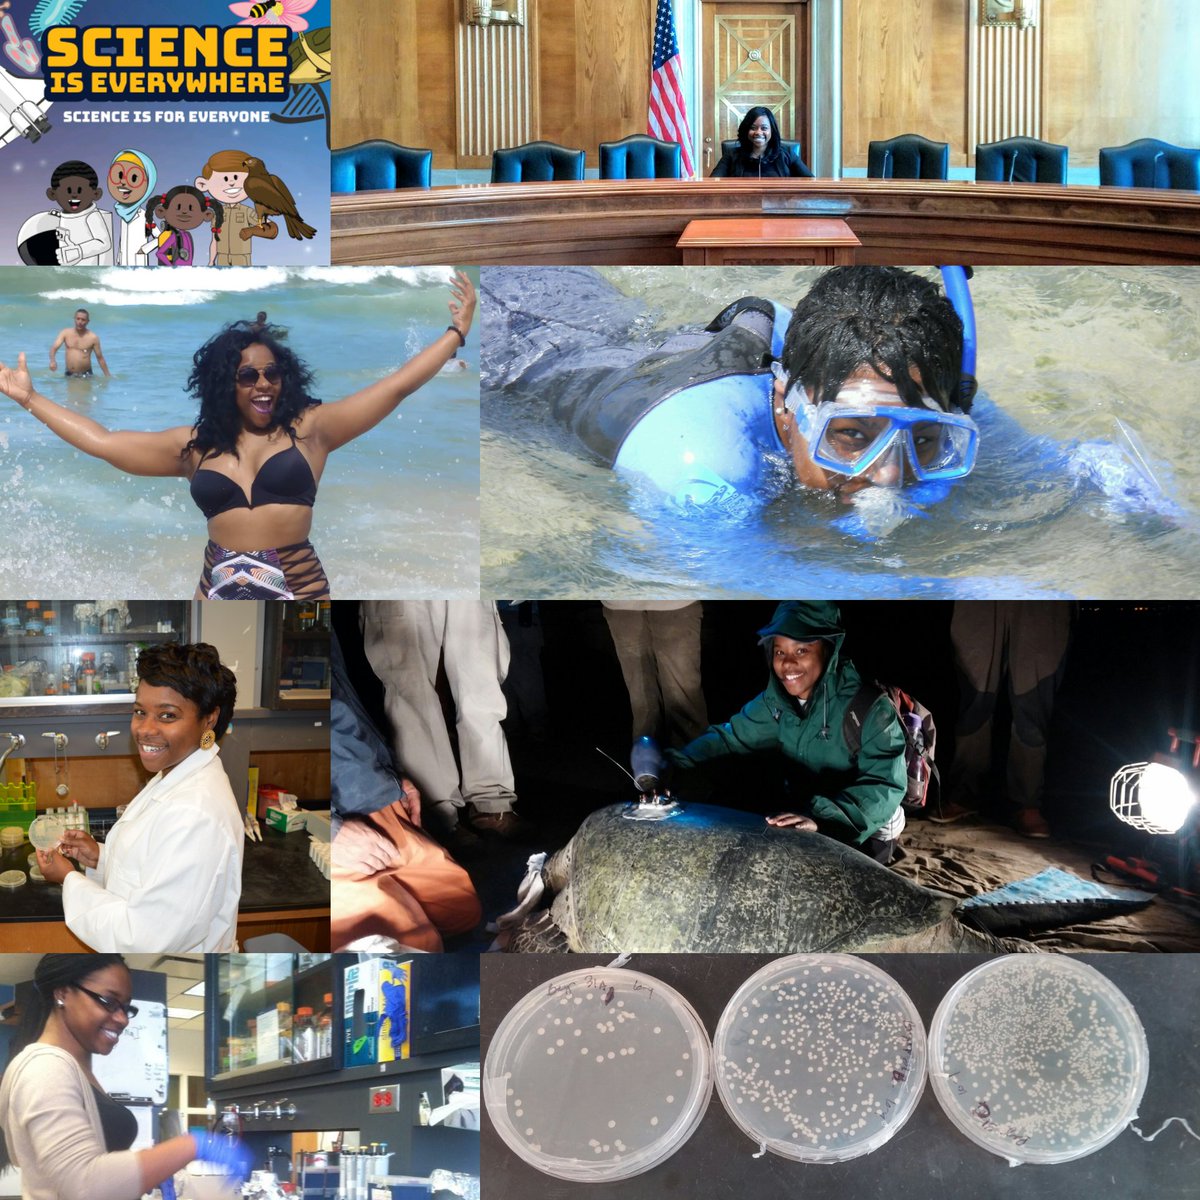 400 years of slavery is a portion of our story. We are innovators, activists, educators & scientists! We build communities, we are resilient, we make history, we are joyous & shift narratives. WE ARE #BlackInMarineScience Let's celebrate us. #BlackInMarineScienceWeek #ForUsFriday